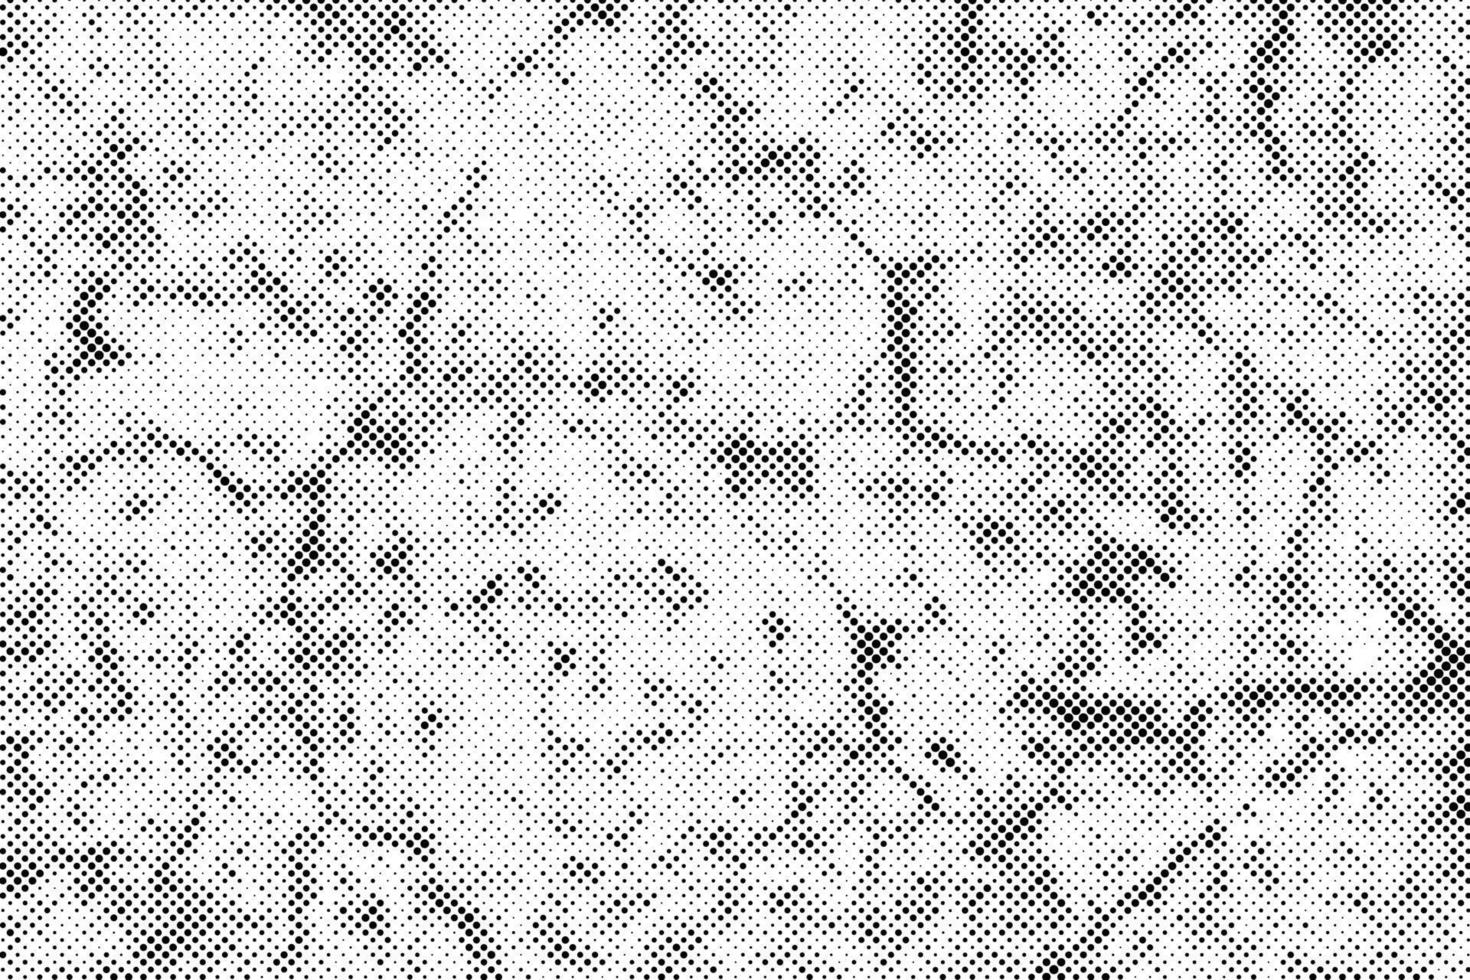 Vector halftone texture effect. Dots pattern background.